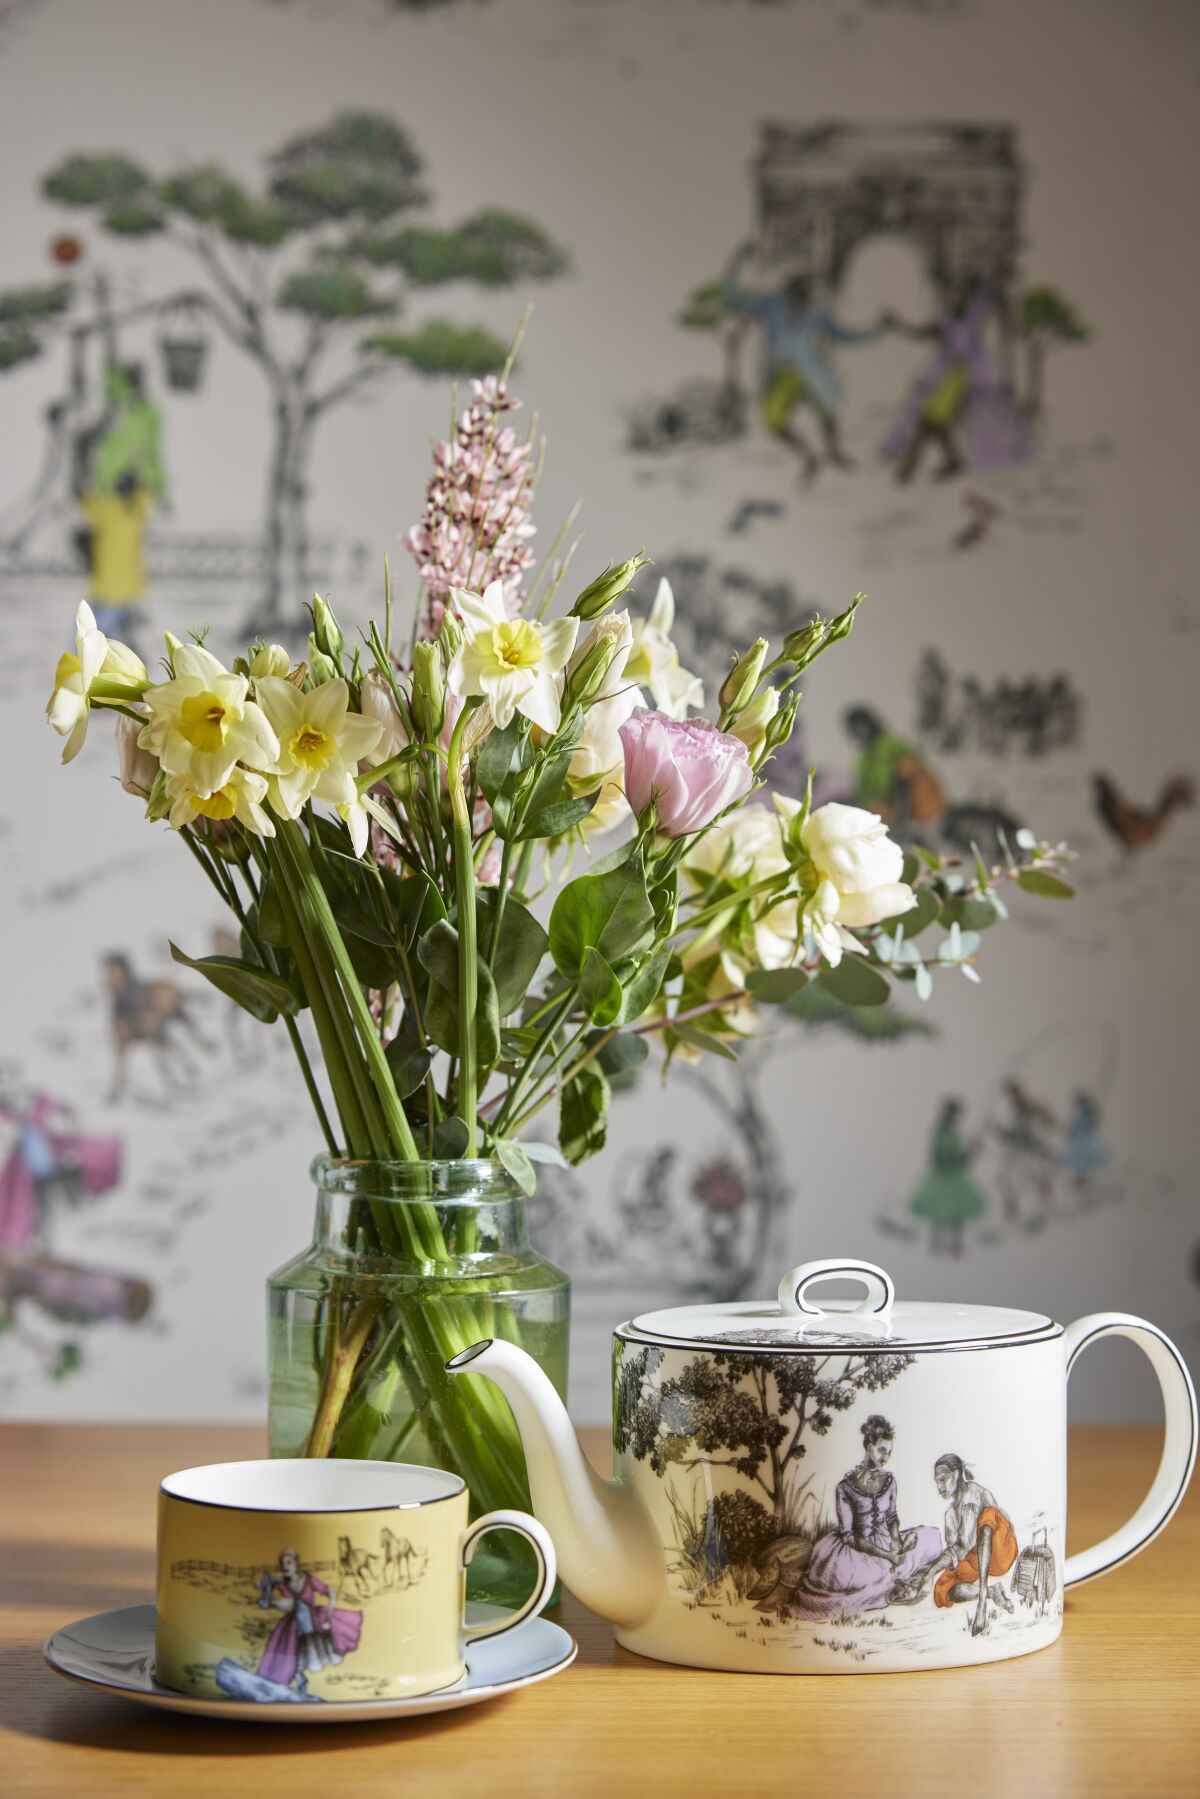 China designed by Sheila Bridges in collaboration with pottery company Wedgwood, at Veronica Chambers’ home in London.